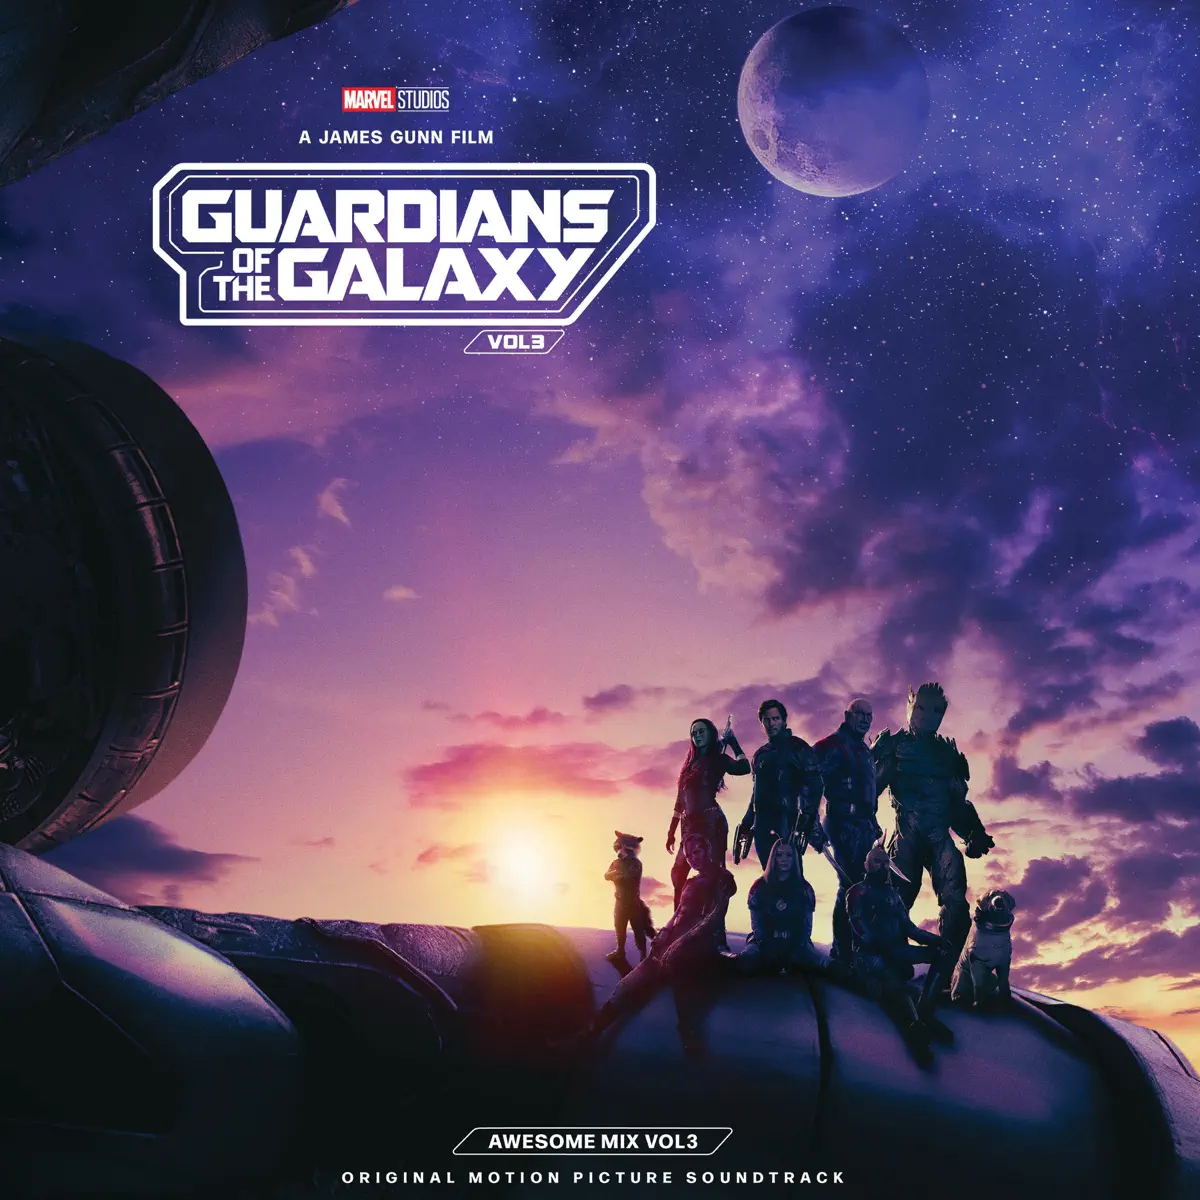 Various Artists - 银河护卫队3 Guardians of the Galaxy, Vol. 3 (Original Motion Picture Soundtrack) [Awesome Mix, Vol. 3] (2023) [iTunes Plus AAC M4A]-新房子